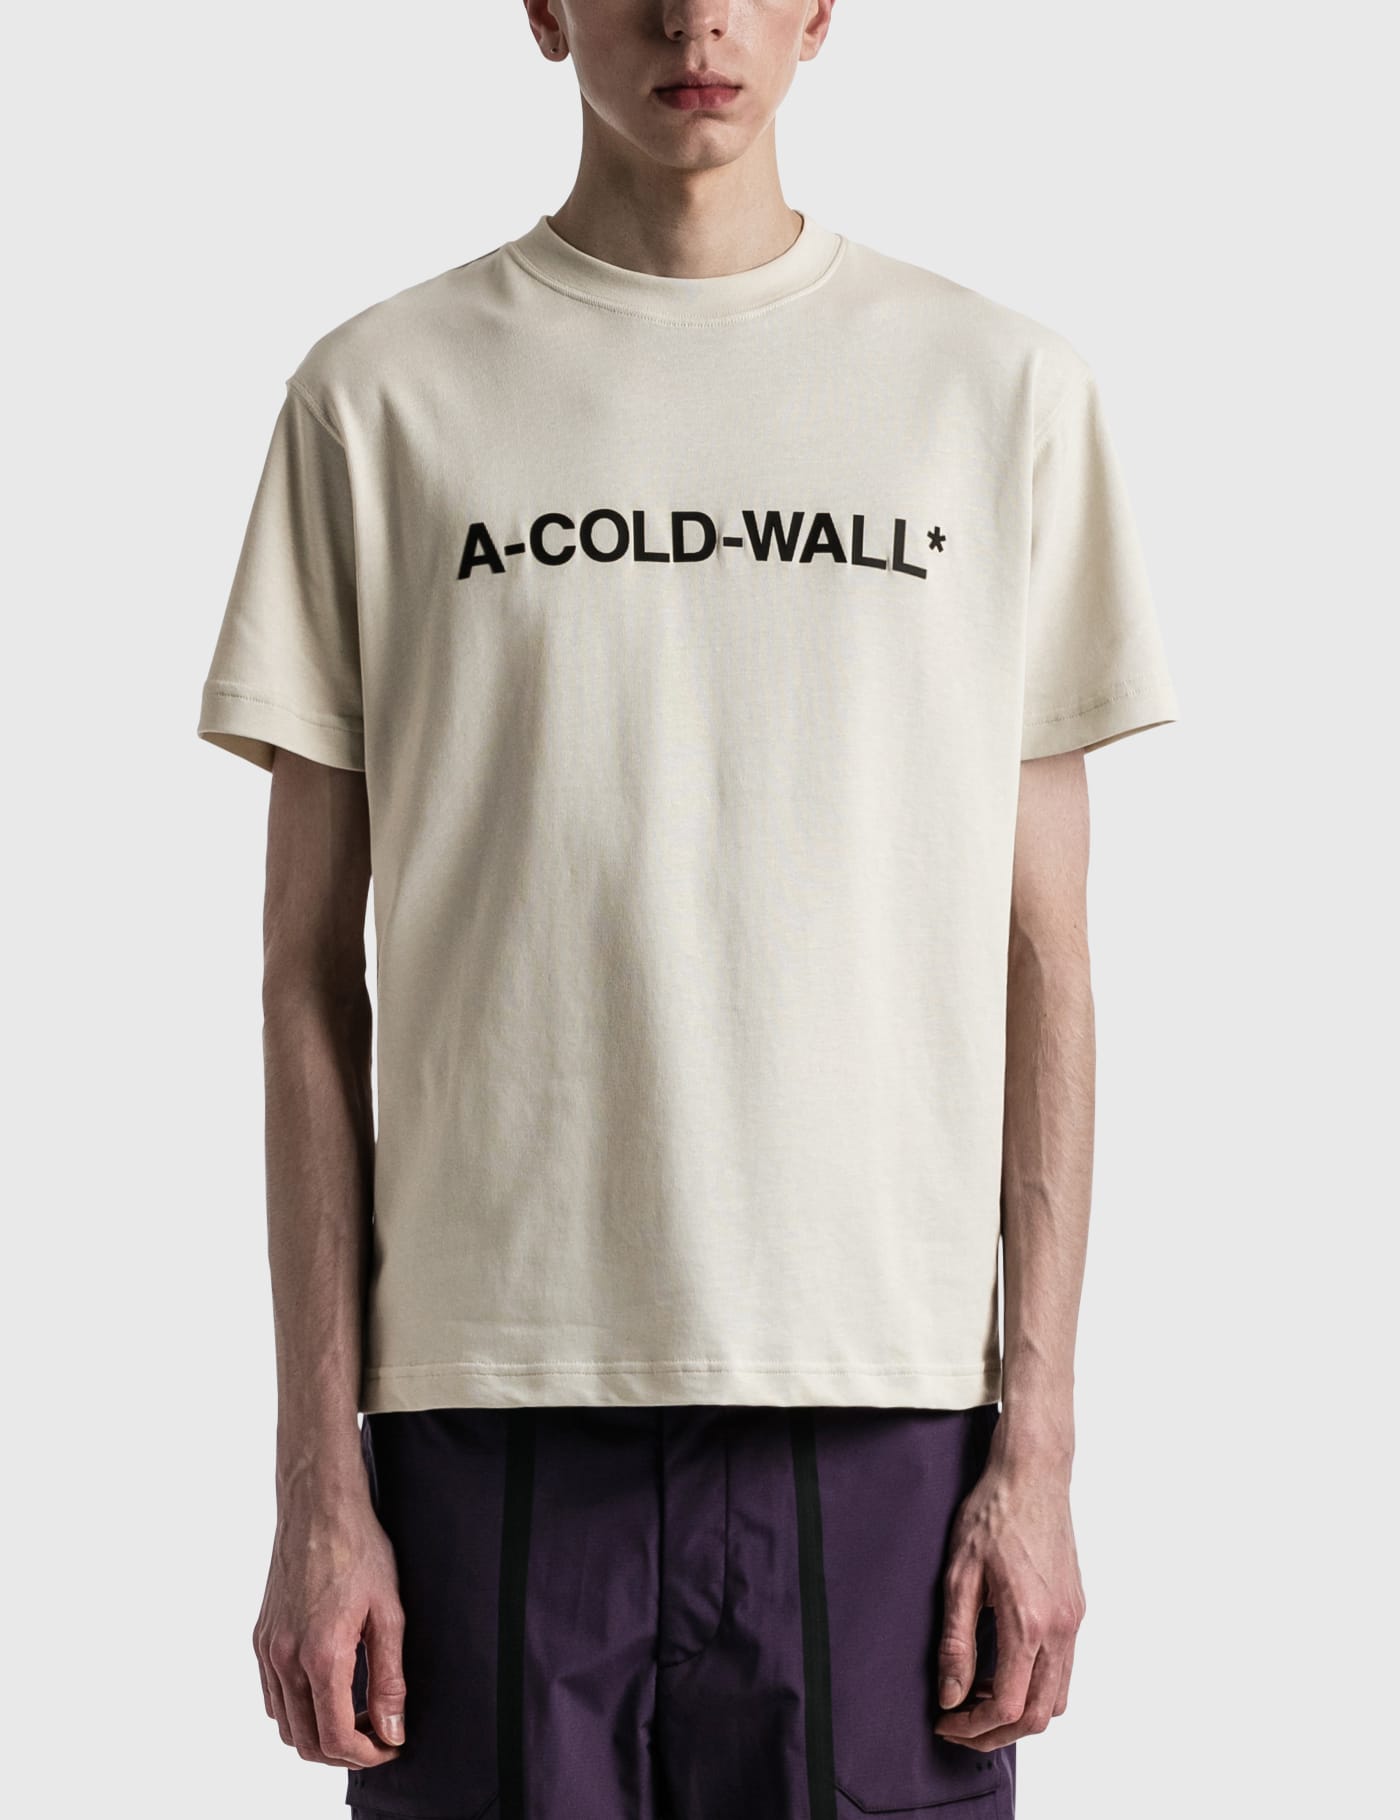 A-COLD-WALL* | HBX - Globally Curated Fashion and Lifestyle by 